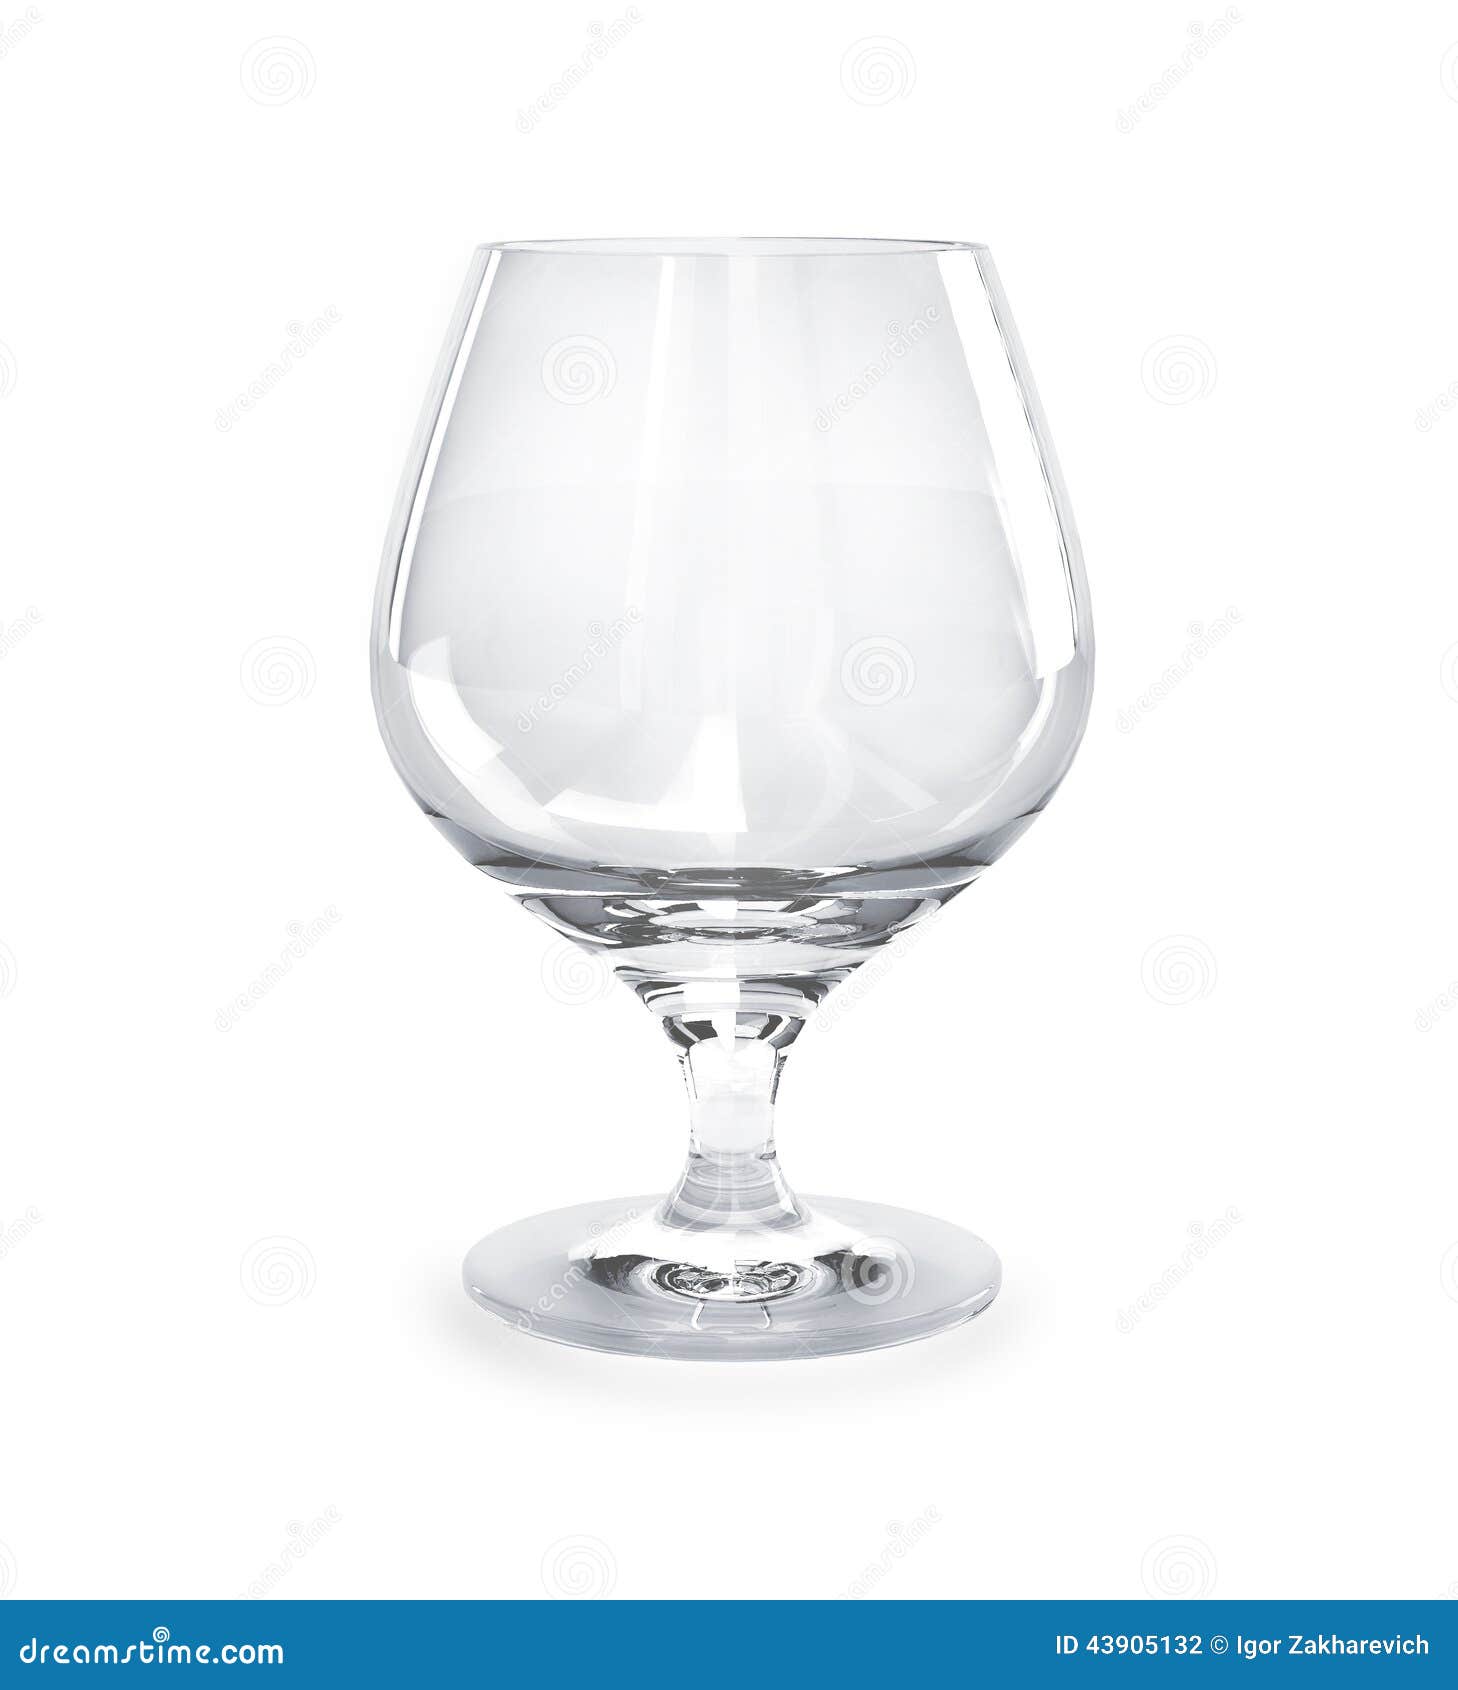 classic martini glass, bar ware, necessary accessories for parties